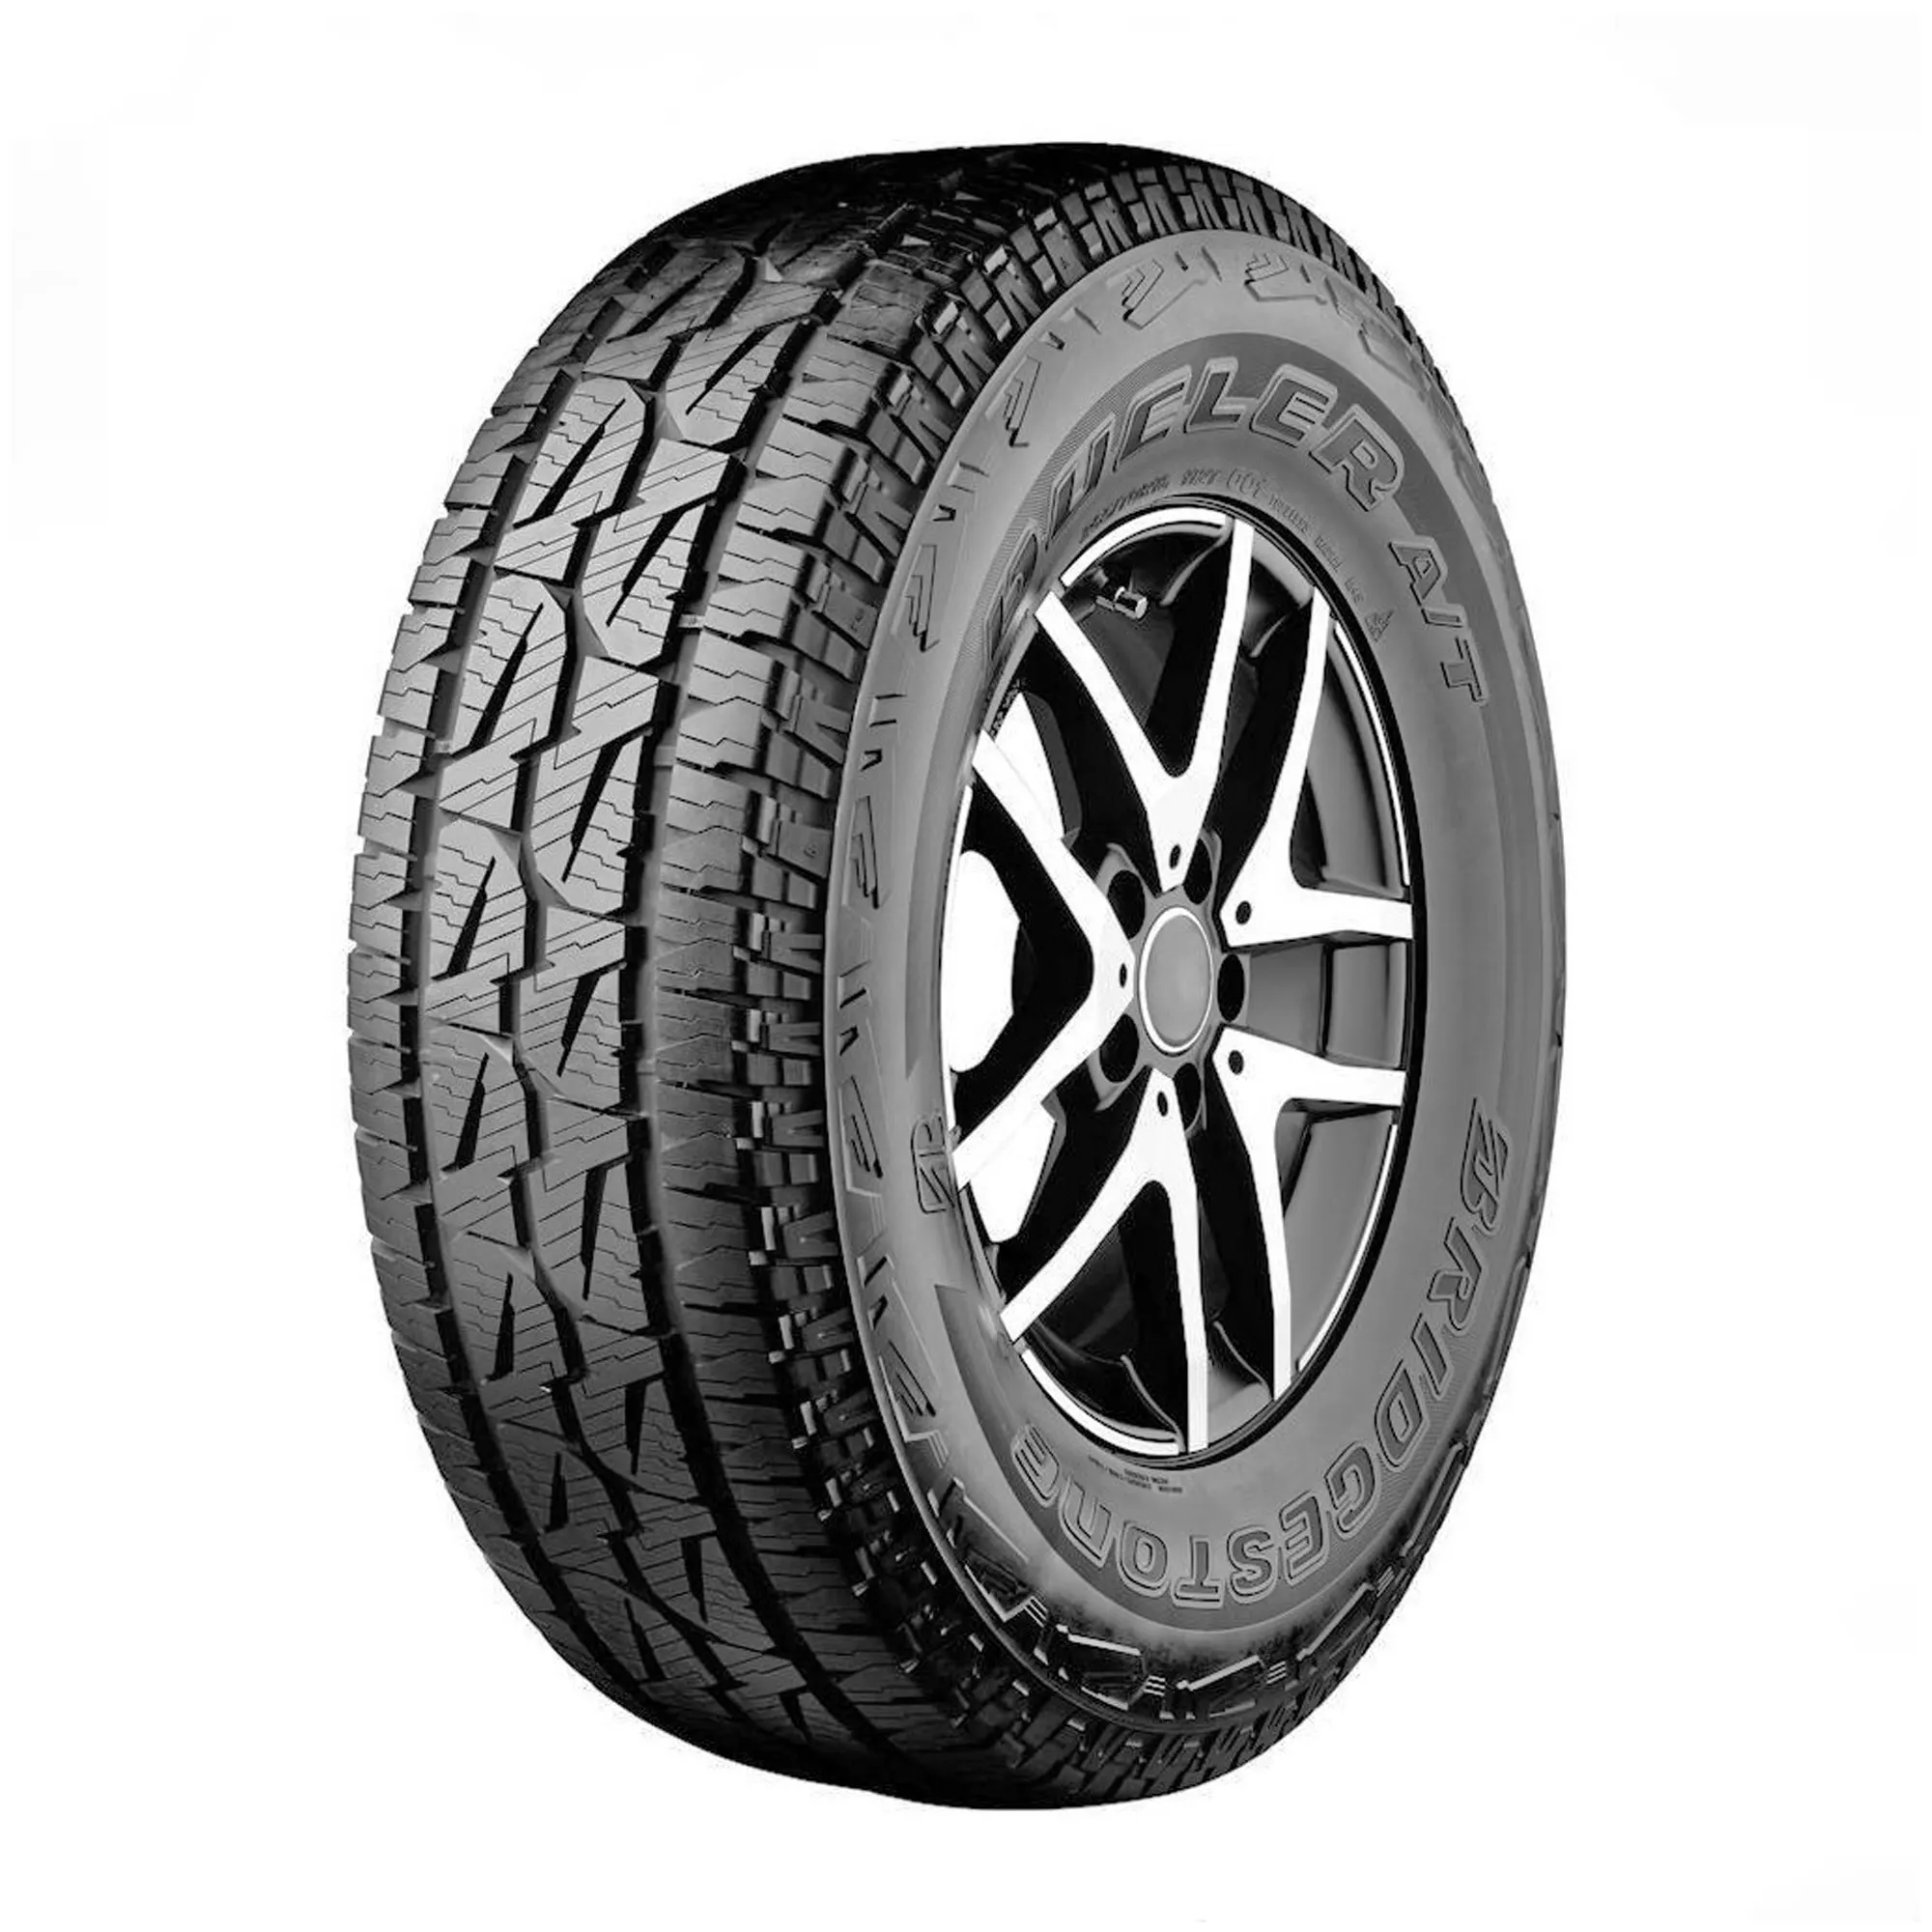 Шина 275/70R16 114S Dueler A/T 001